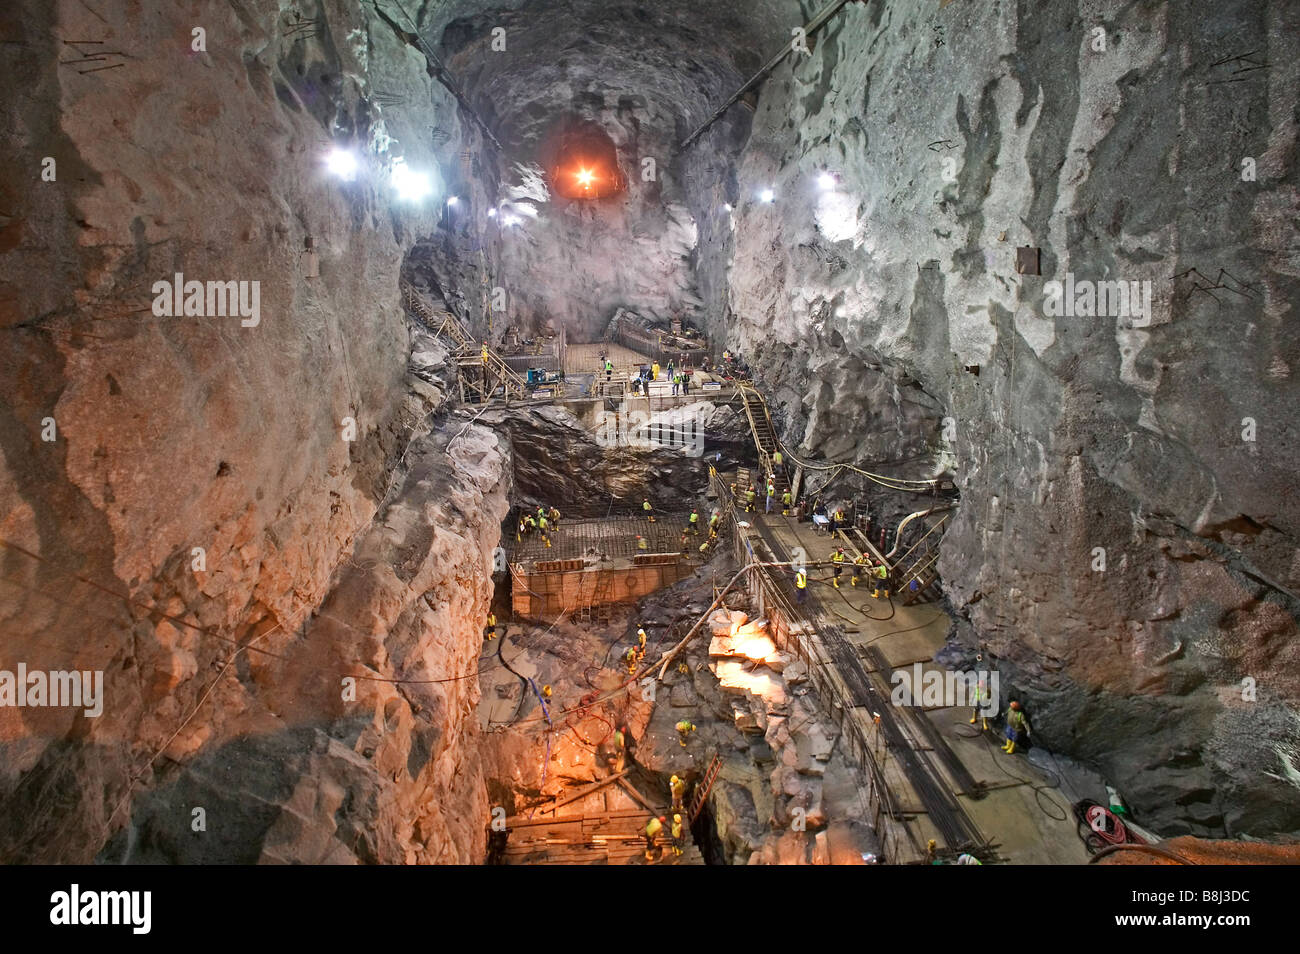 Excavation of underground gallery for hydropower plant in Ecuador which will produce industrial and domestic electricity. Stock Photo